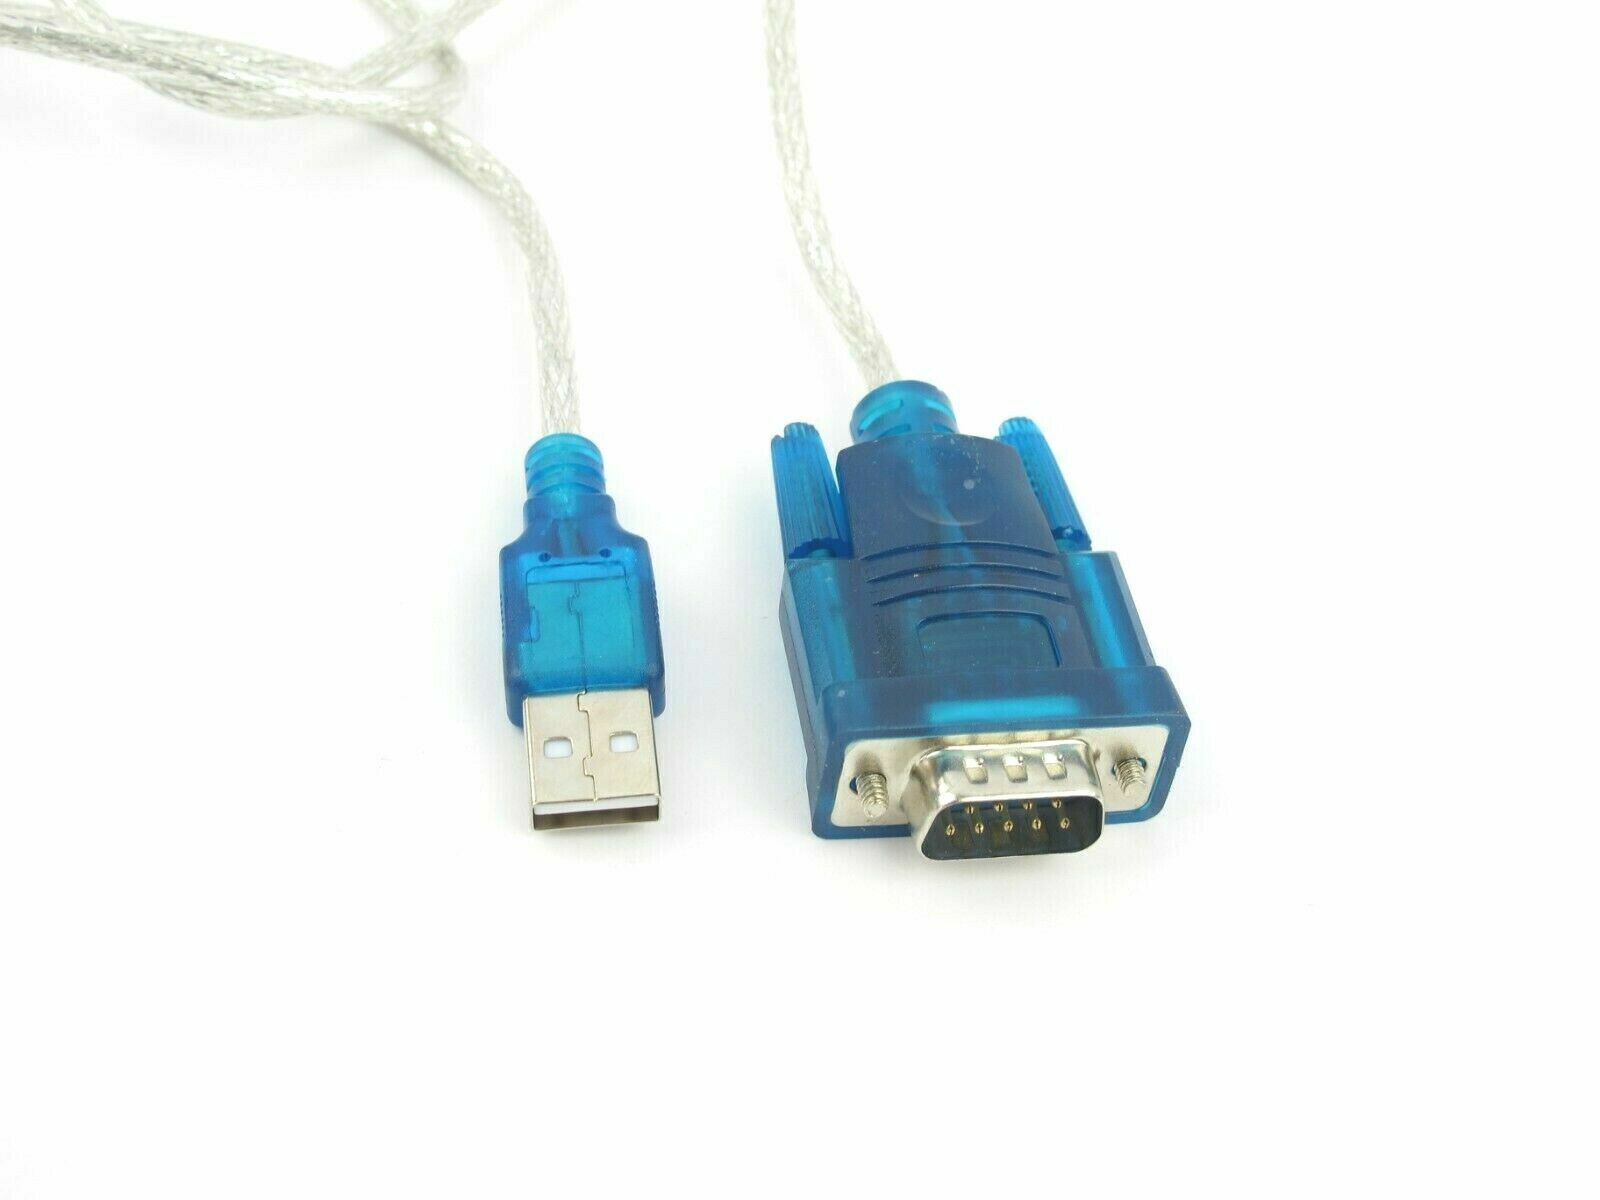 2 Pack USB 2.0 to RS232 Serial 9 Pin 9P DB9 Adapter Converter Cable Cord New Unbranded Does not apply - фотография #4